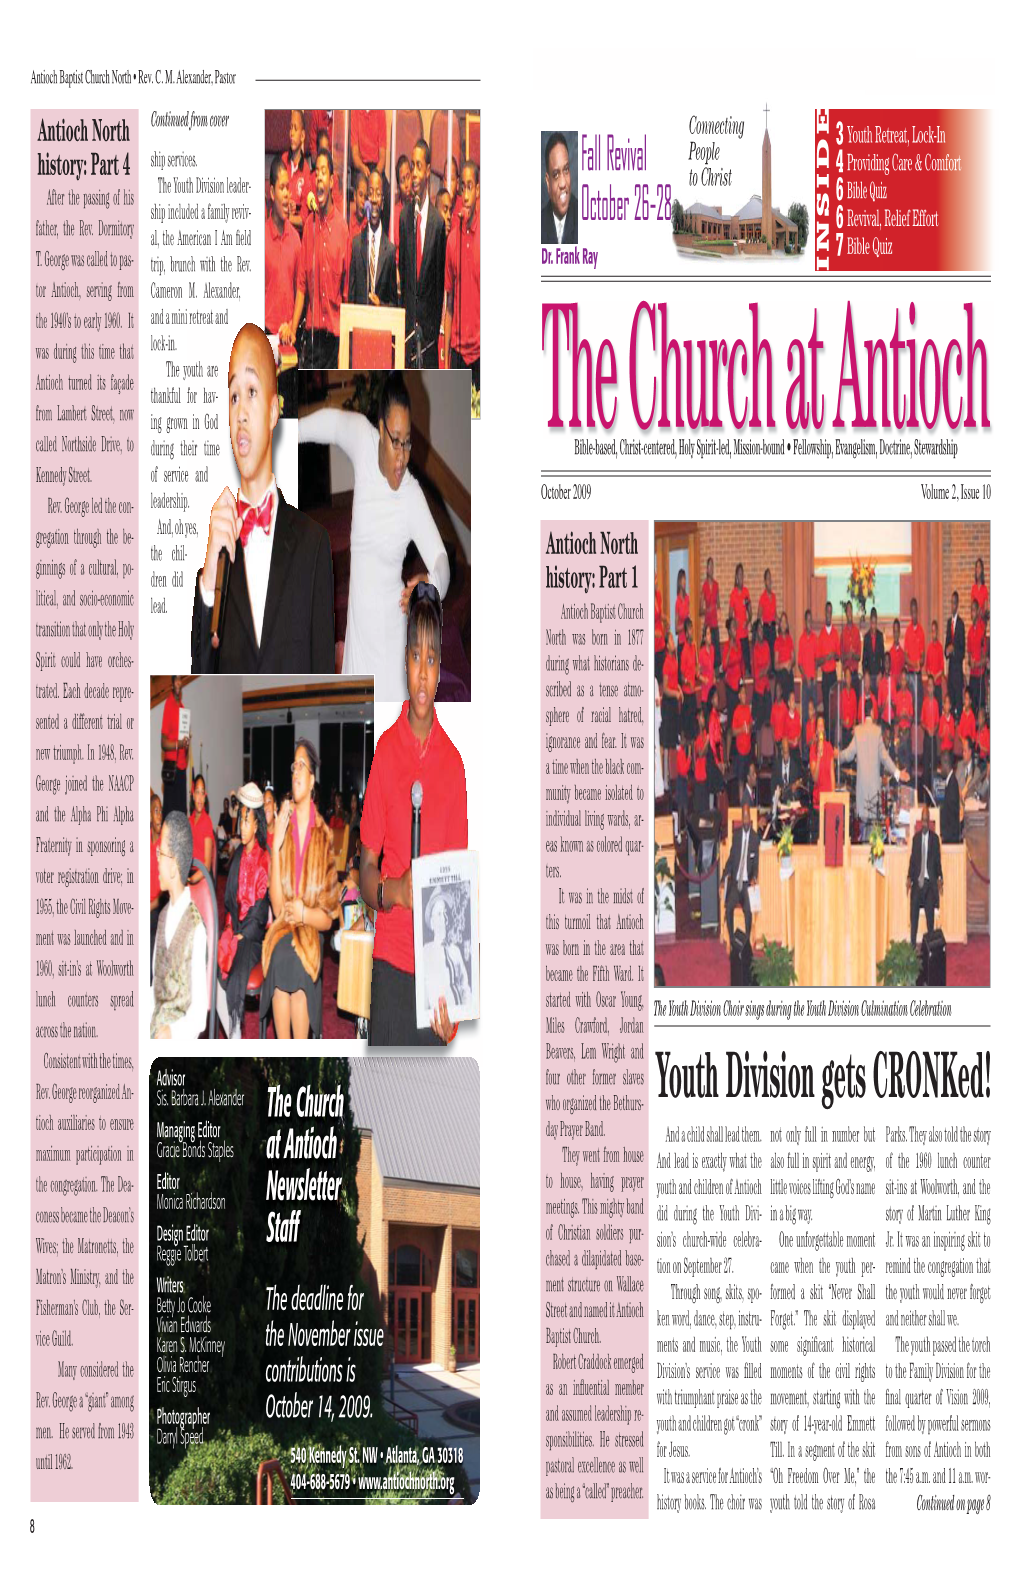 Youth Division Gets Cronked! Tioch Auxiliaries to Ensure the Church Managing Editor Day Prayer Band